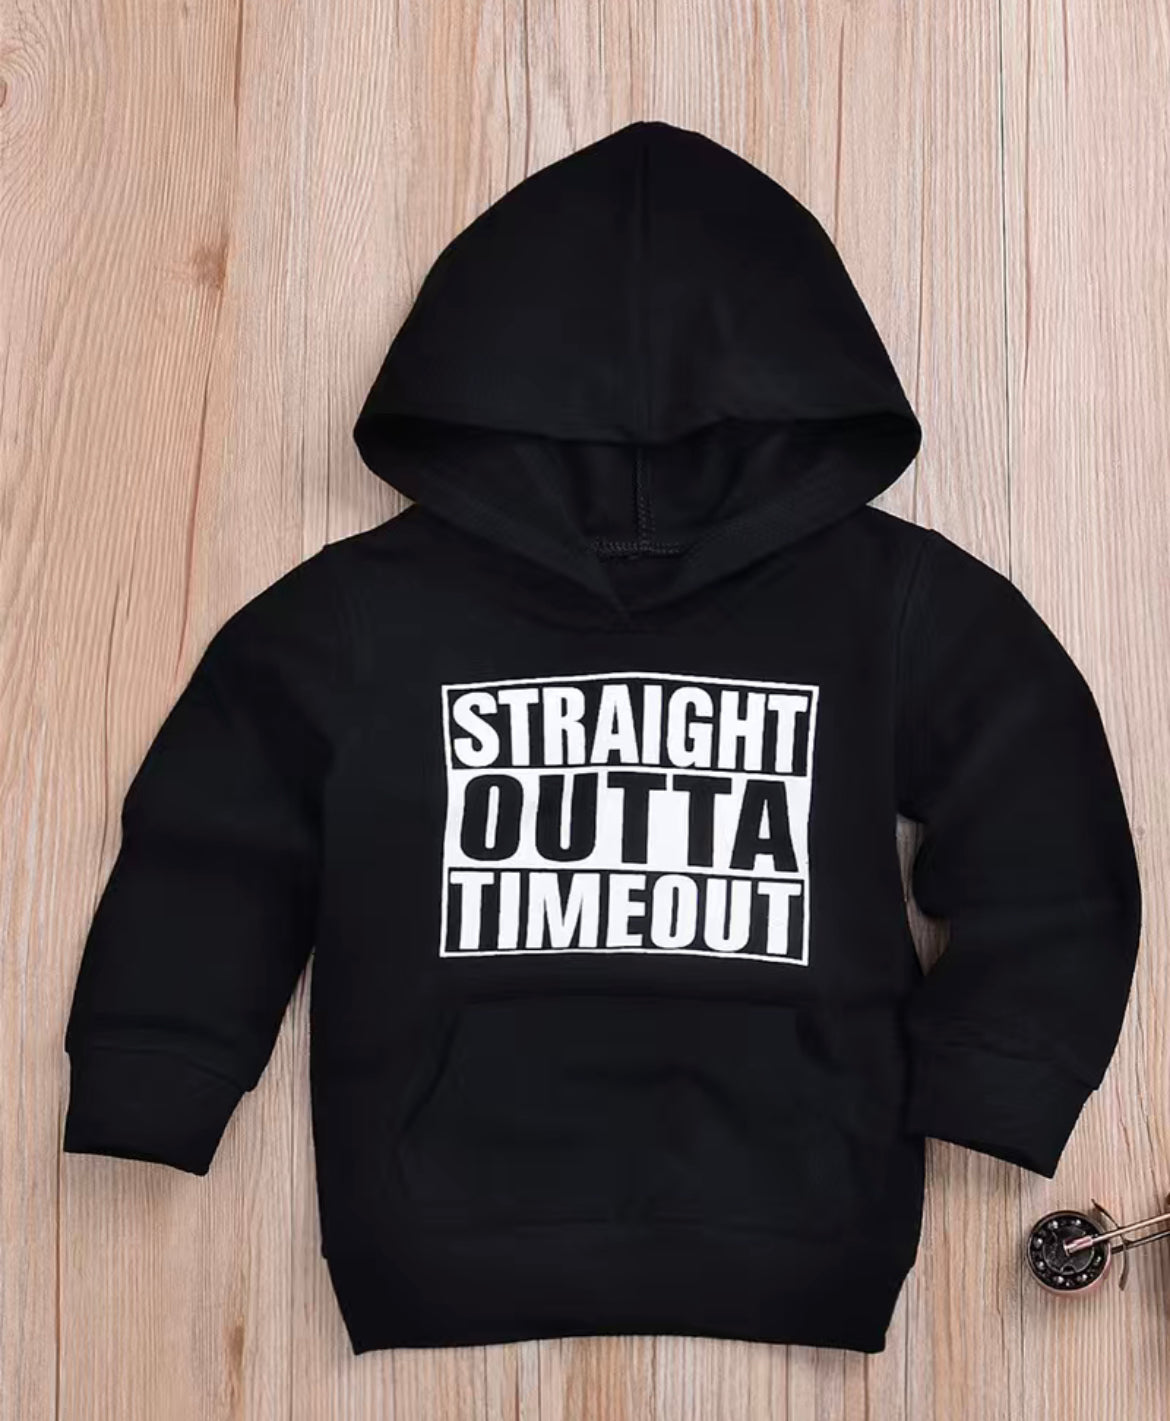 “Straight Out Of Time Out” Sweatshirt